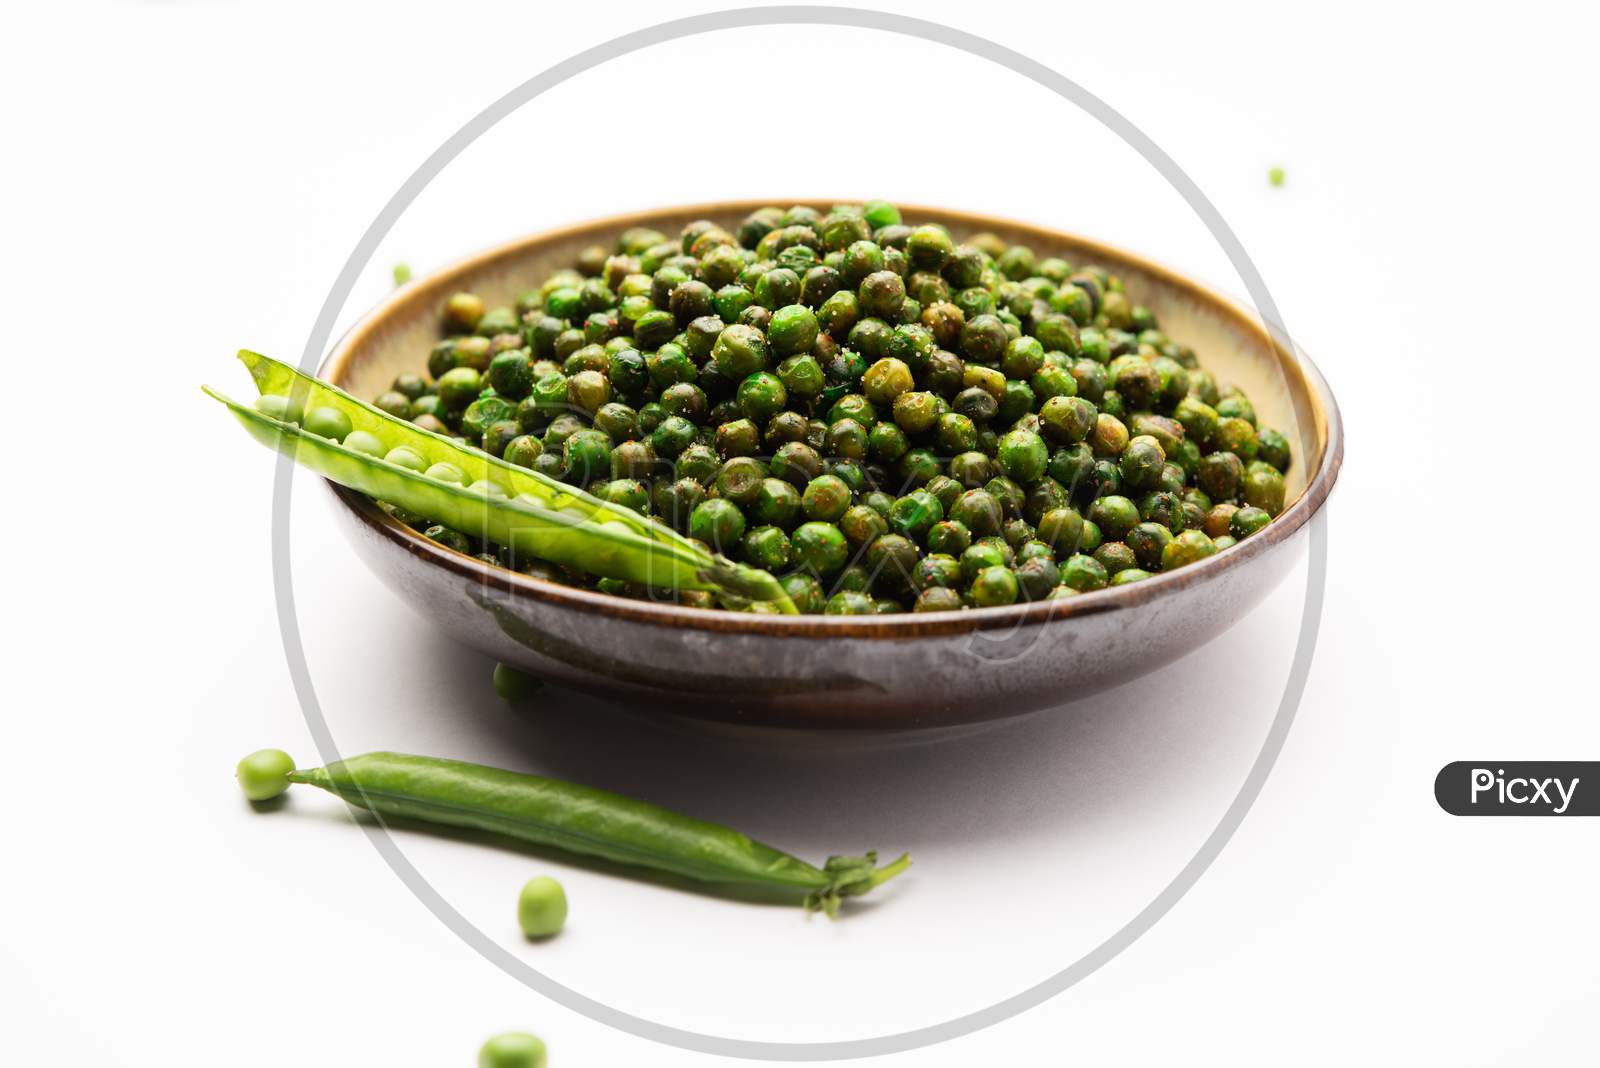 Indian Snacks Fried Or Roasted Salted Green Peas Or Chatpata Matar